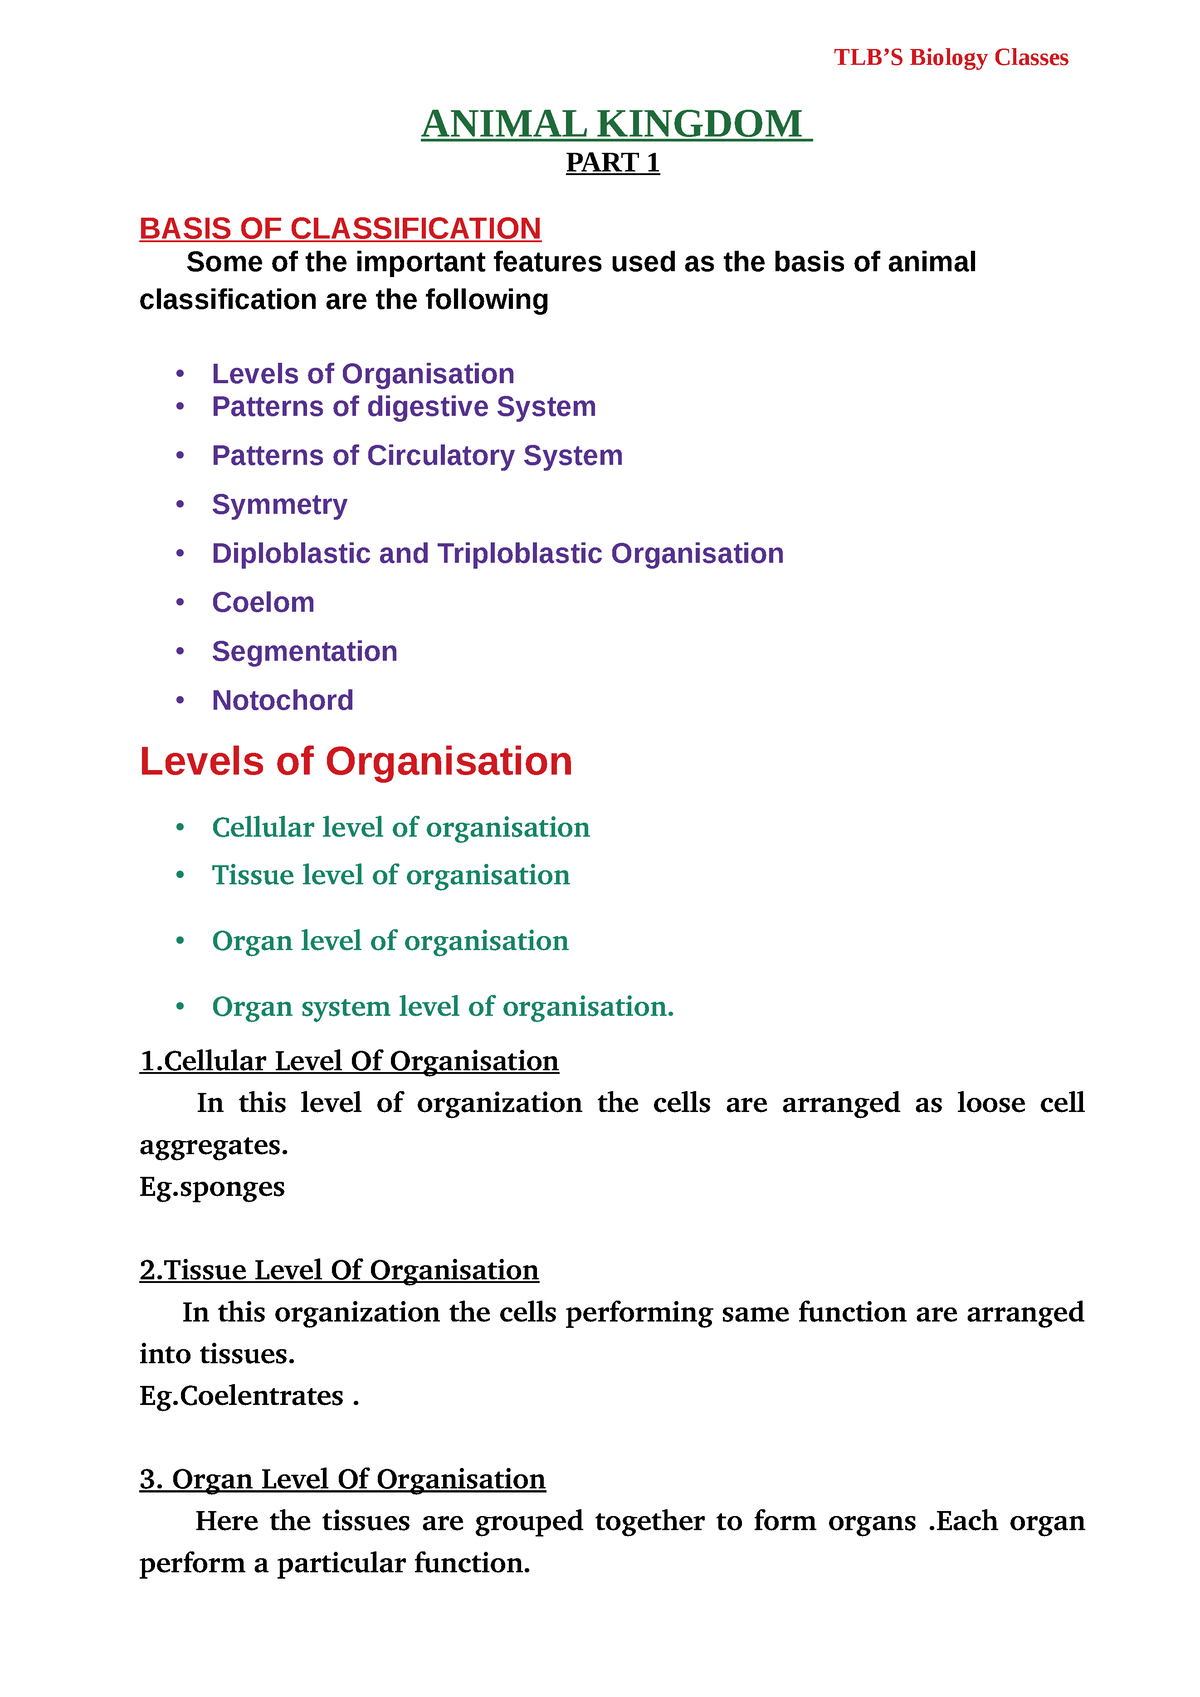 Animal Kingdom Part 1 notes - ANIMAL KINGDOM PART 1 BASIS OF CLASSIFICATION  Some of the important - Studocu